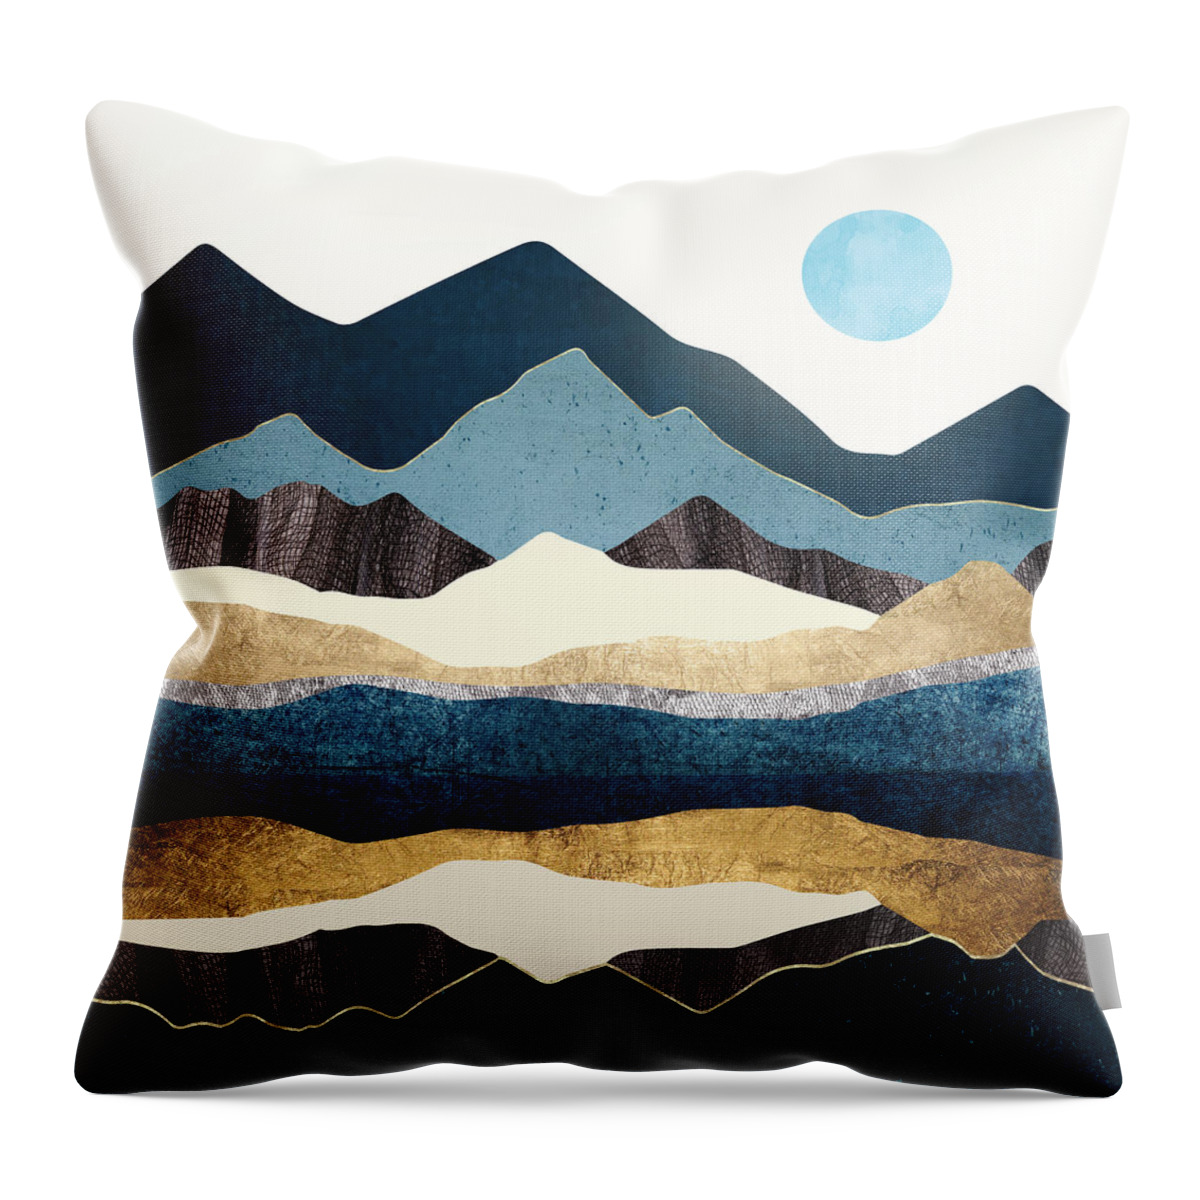 Digital Throw Pillow featuring the digital art Reflect Hills by Spacefrog Designs